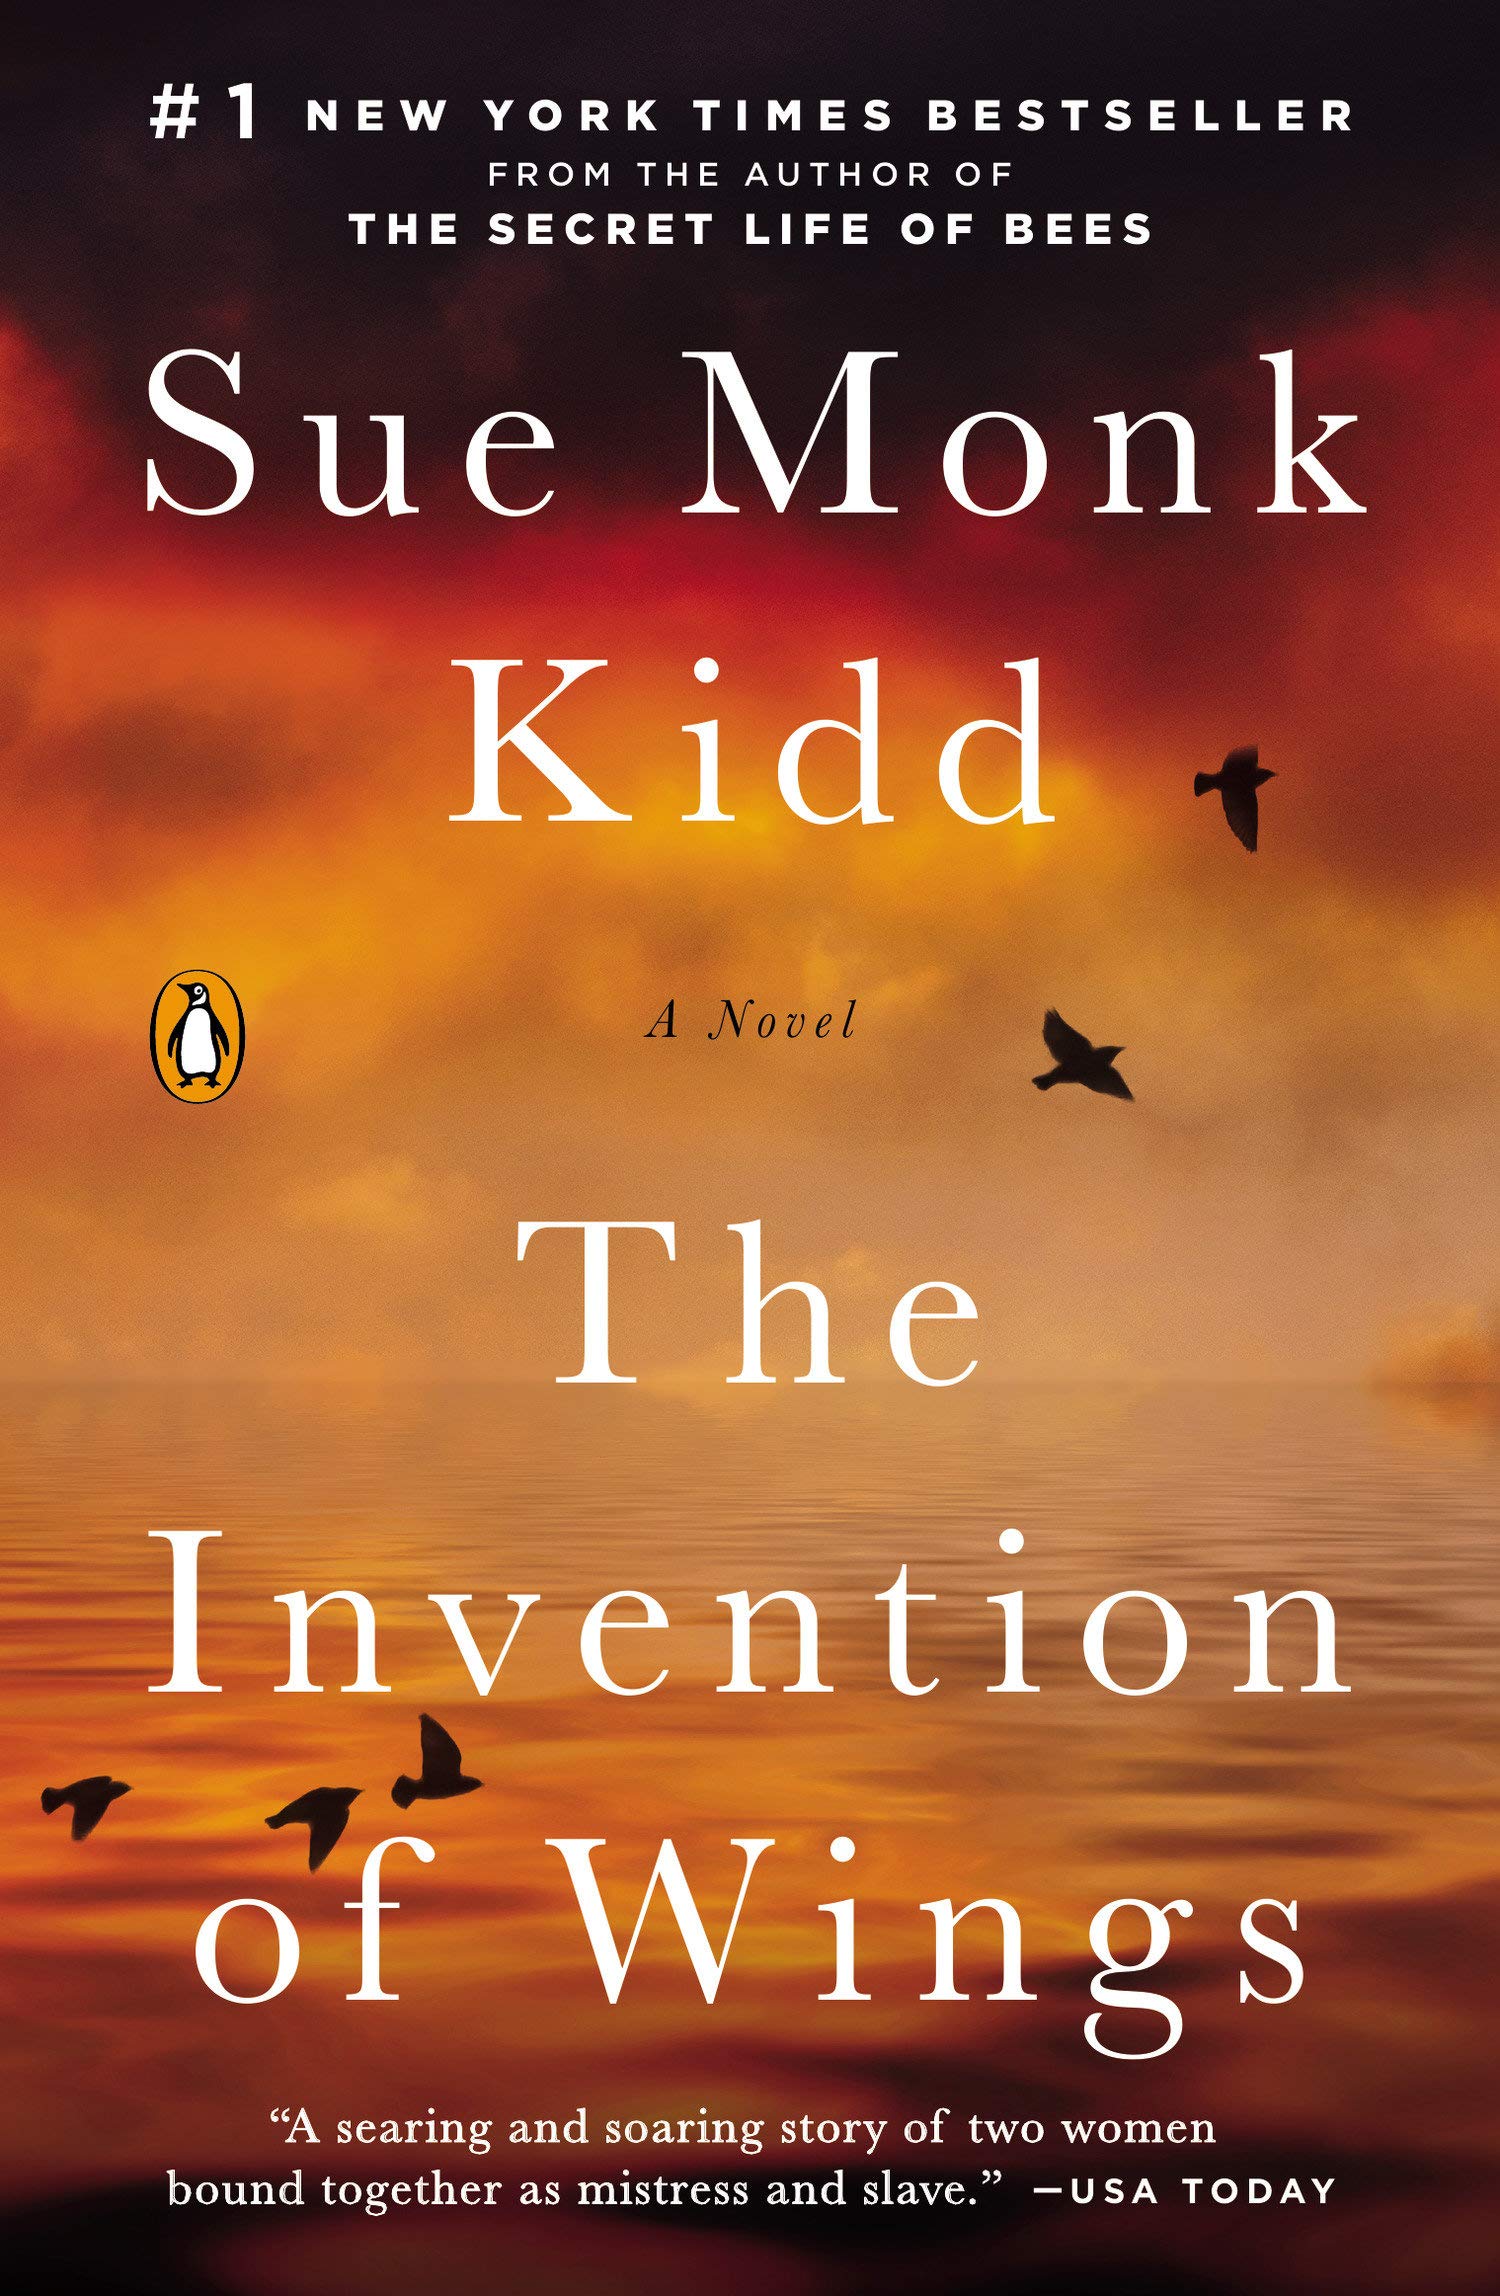 The Invention of Wings book cover done in oranges of calm water and a cloudy sky with the shadows of a few black birds flying around